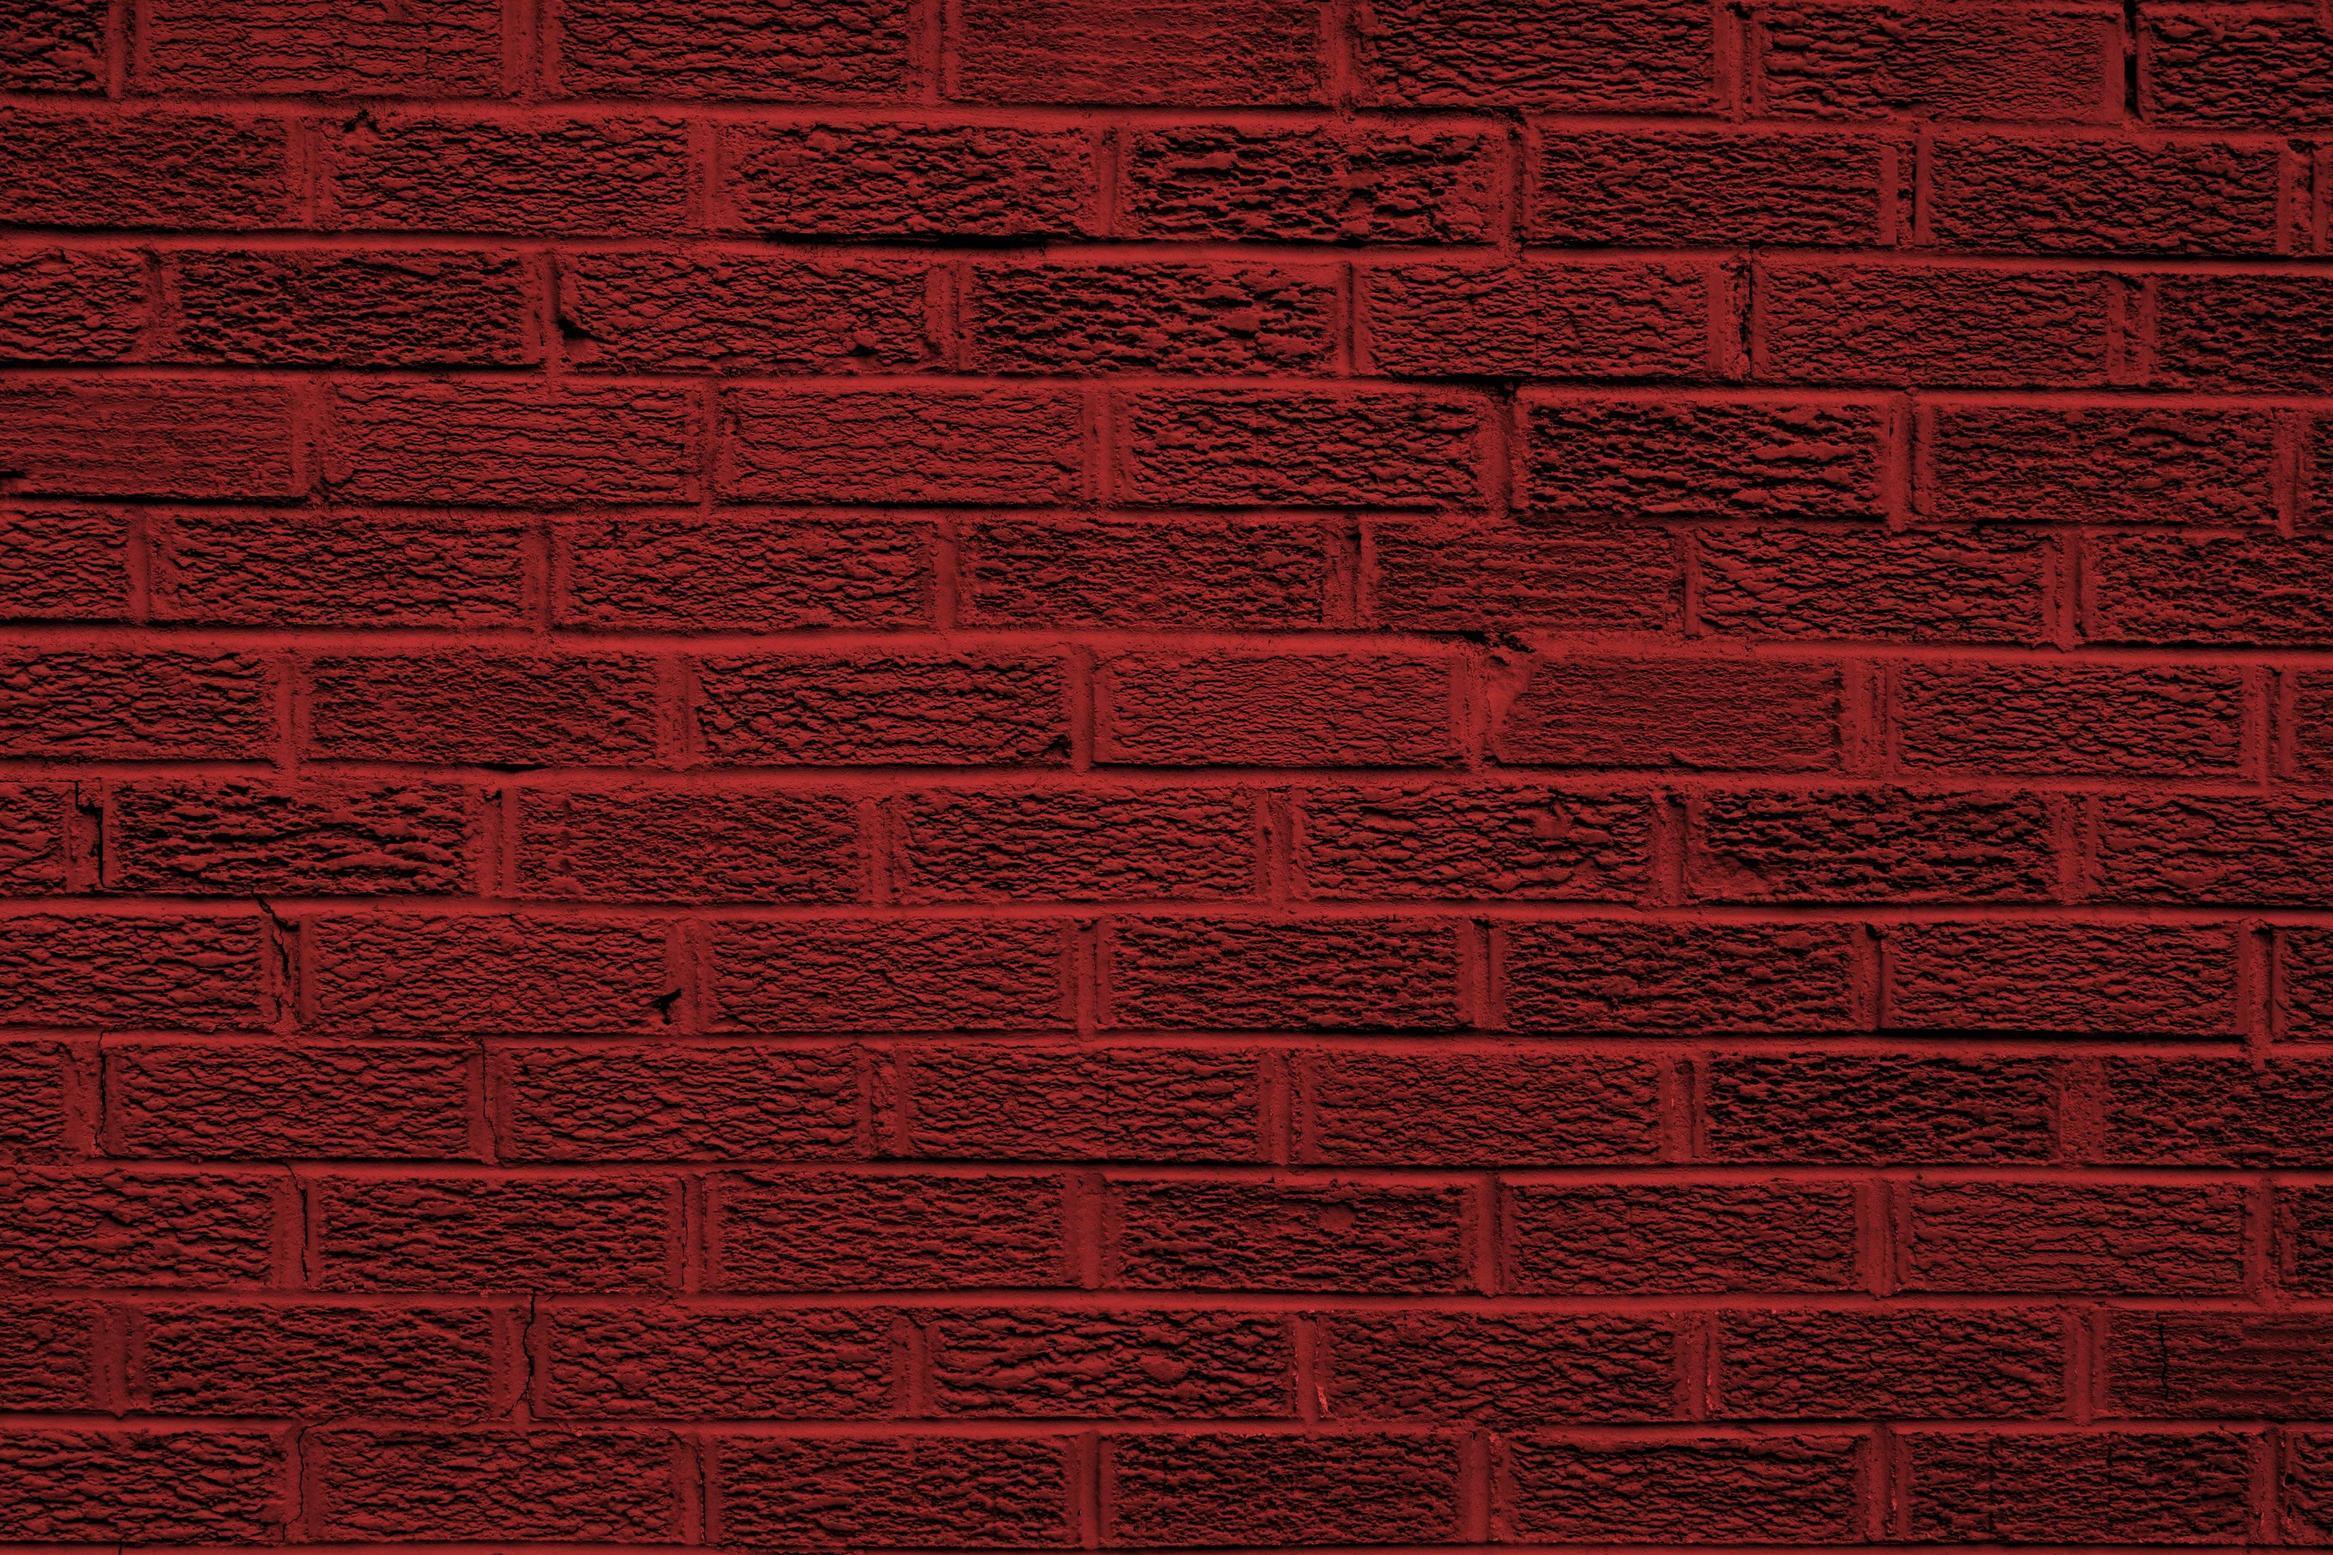 textured brick wallpaper 5 - Image And Wallpaper free to